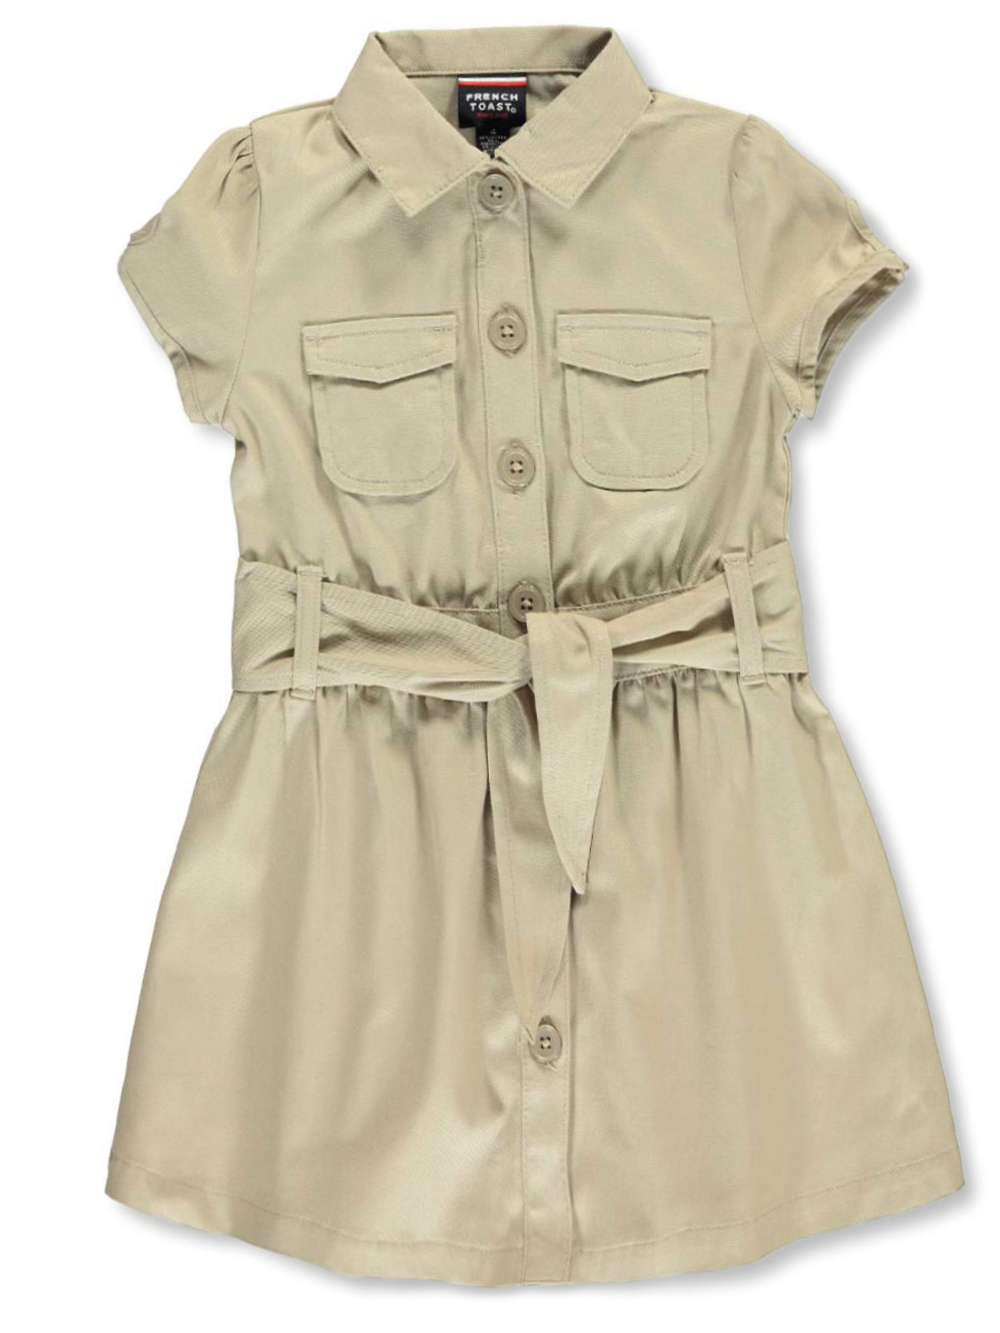 French Toast Little Girls/' /"Safari Classic/" Belted Dress Sizes 4-6X